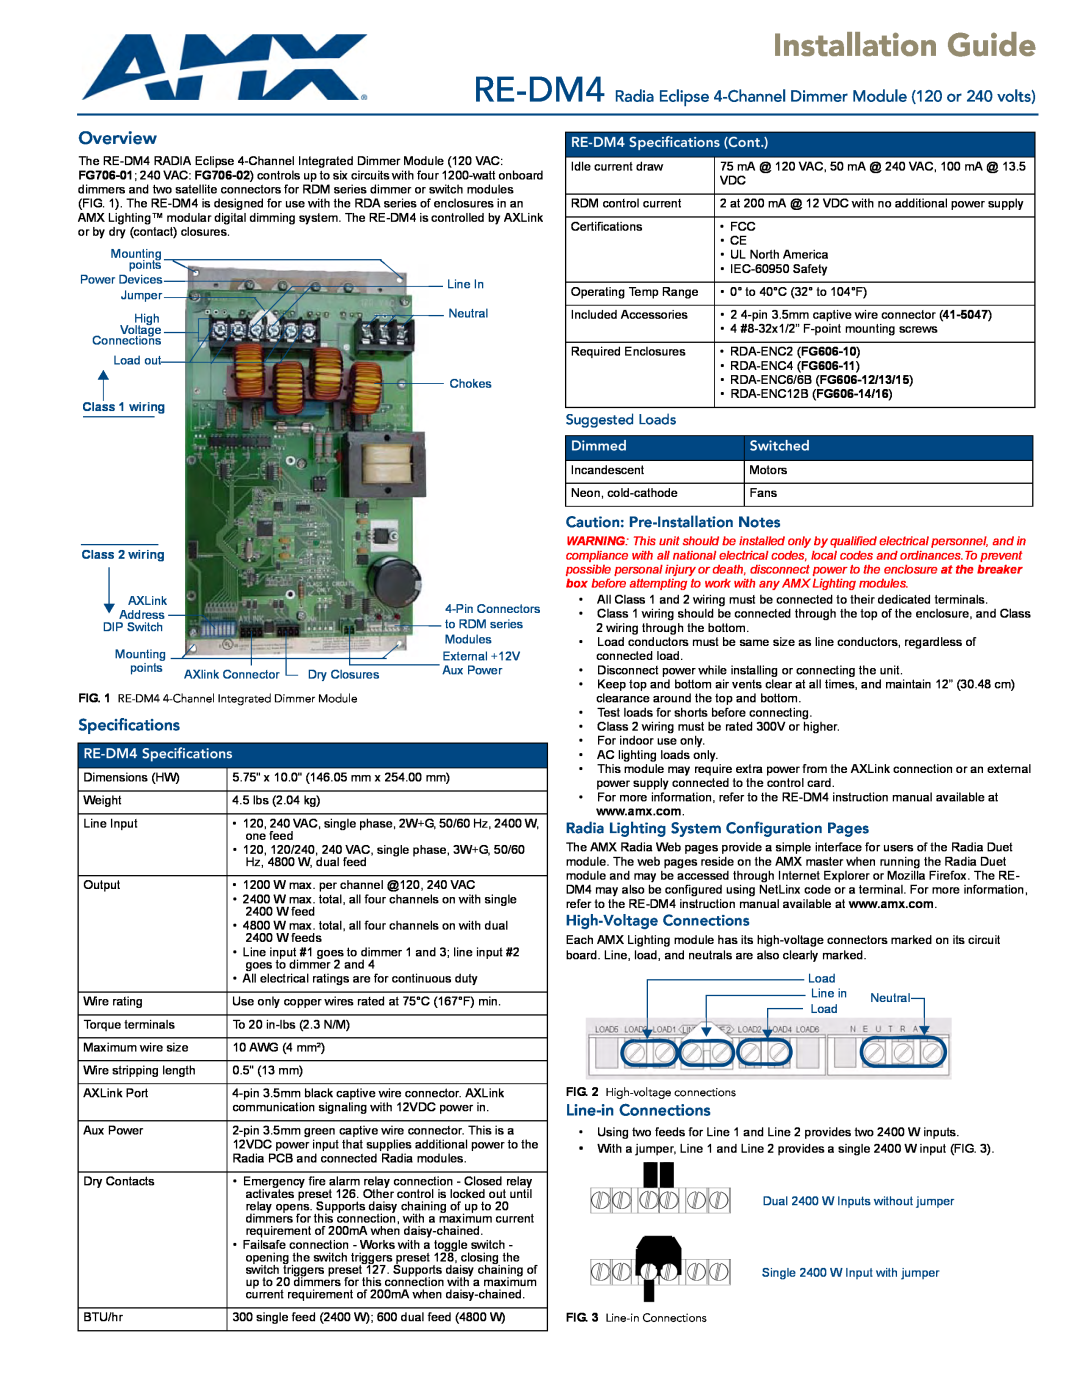 AMX specifications RE-DM4 Radia Eclipse 4-Channel Dimmer Module 120 or 240 volts, Specifications, Line-in Connections 